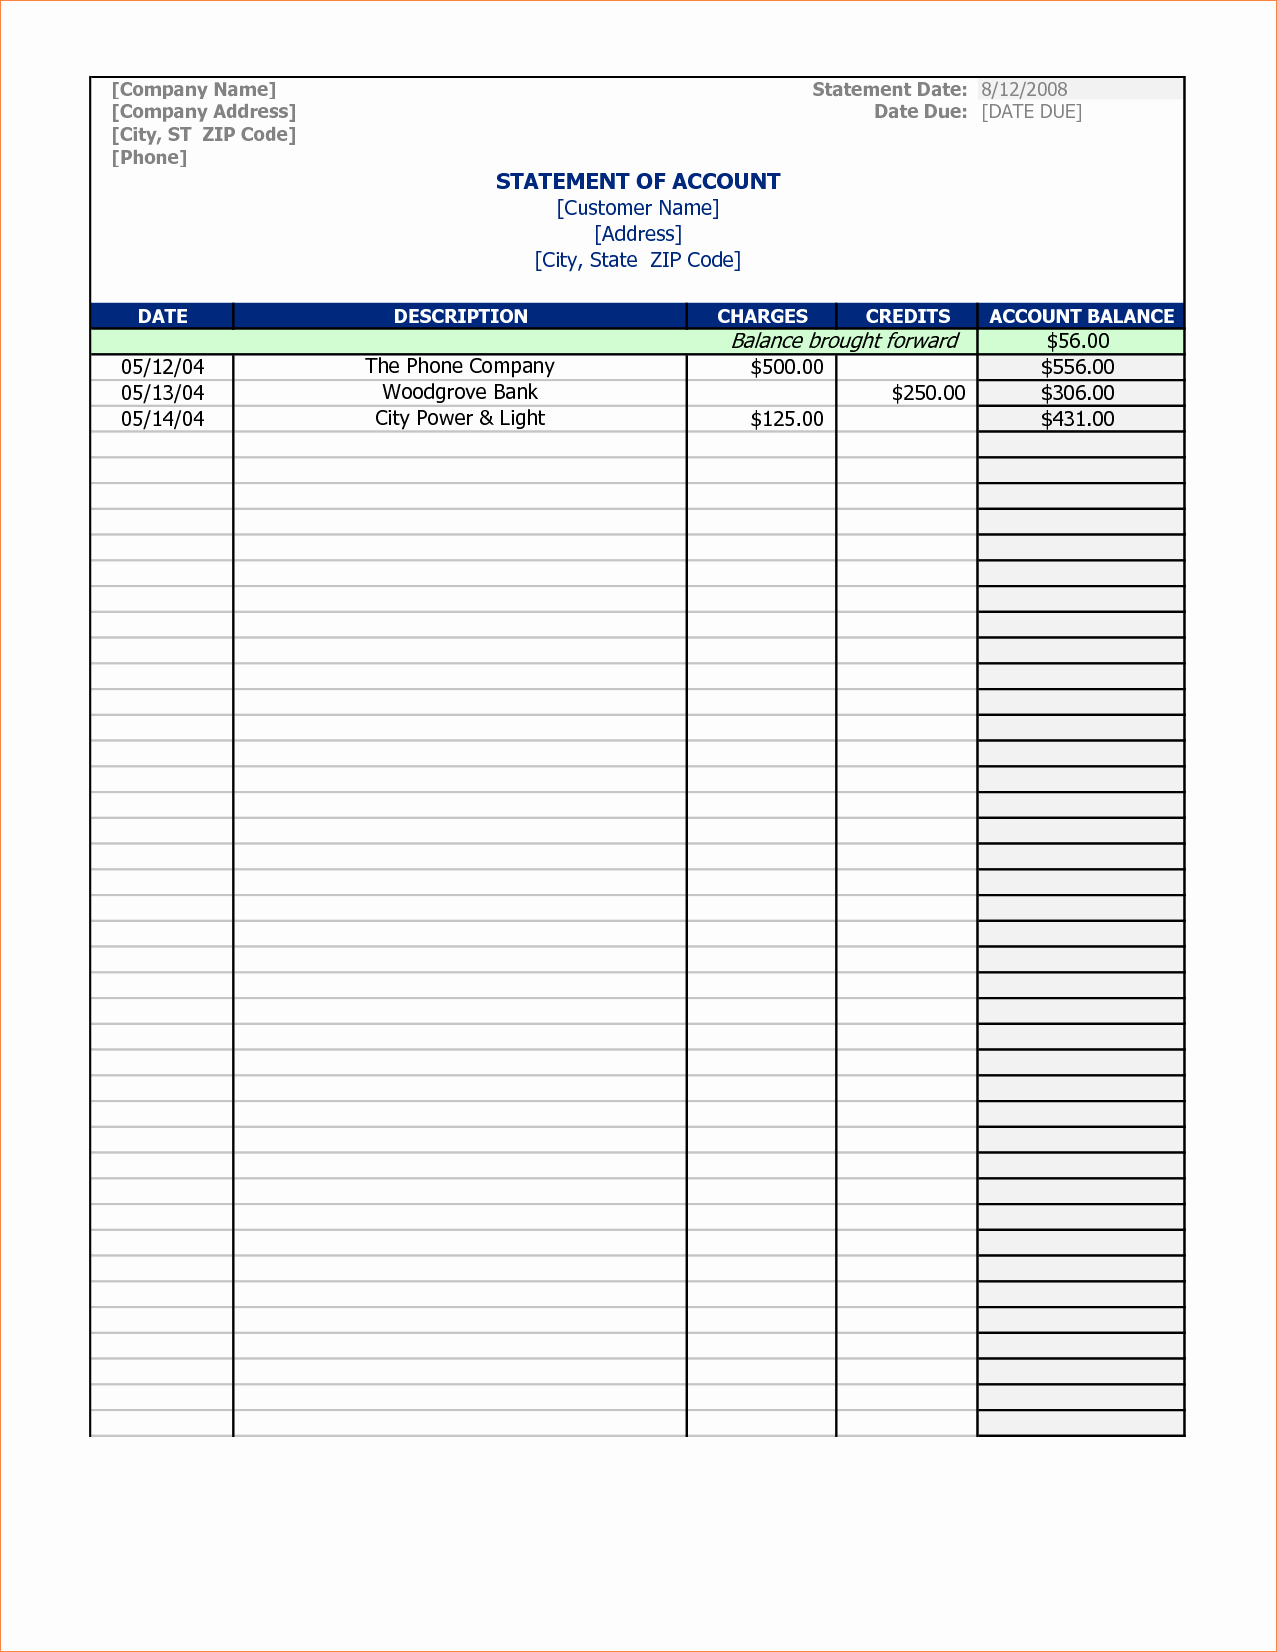 Statement Of Account Template Excel Beautiful 7 Statement Of Account Template